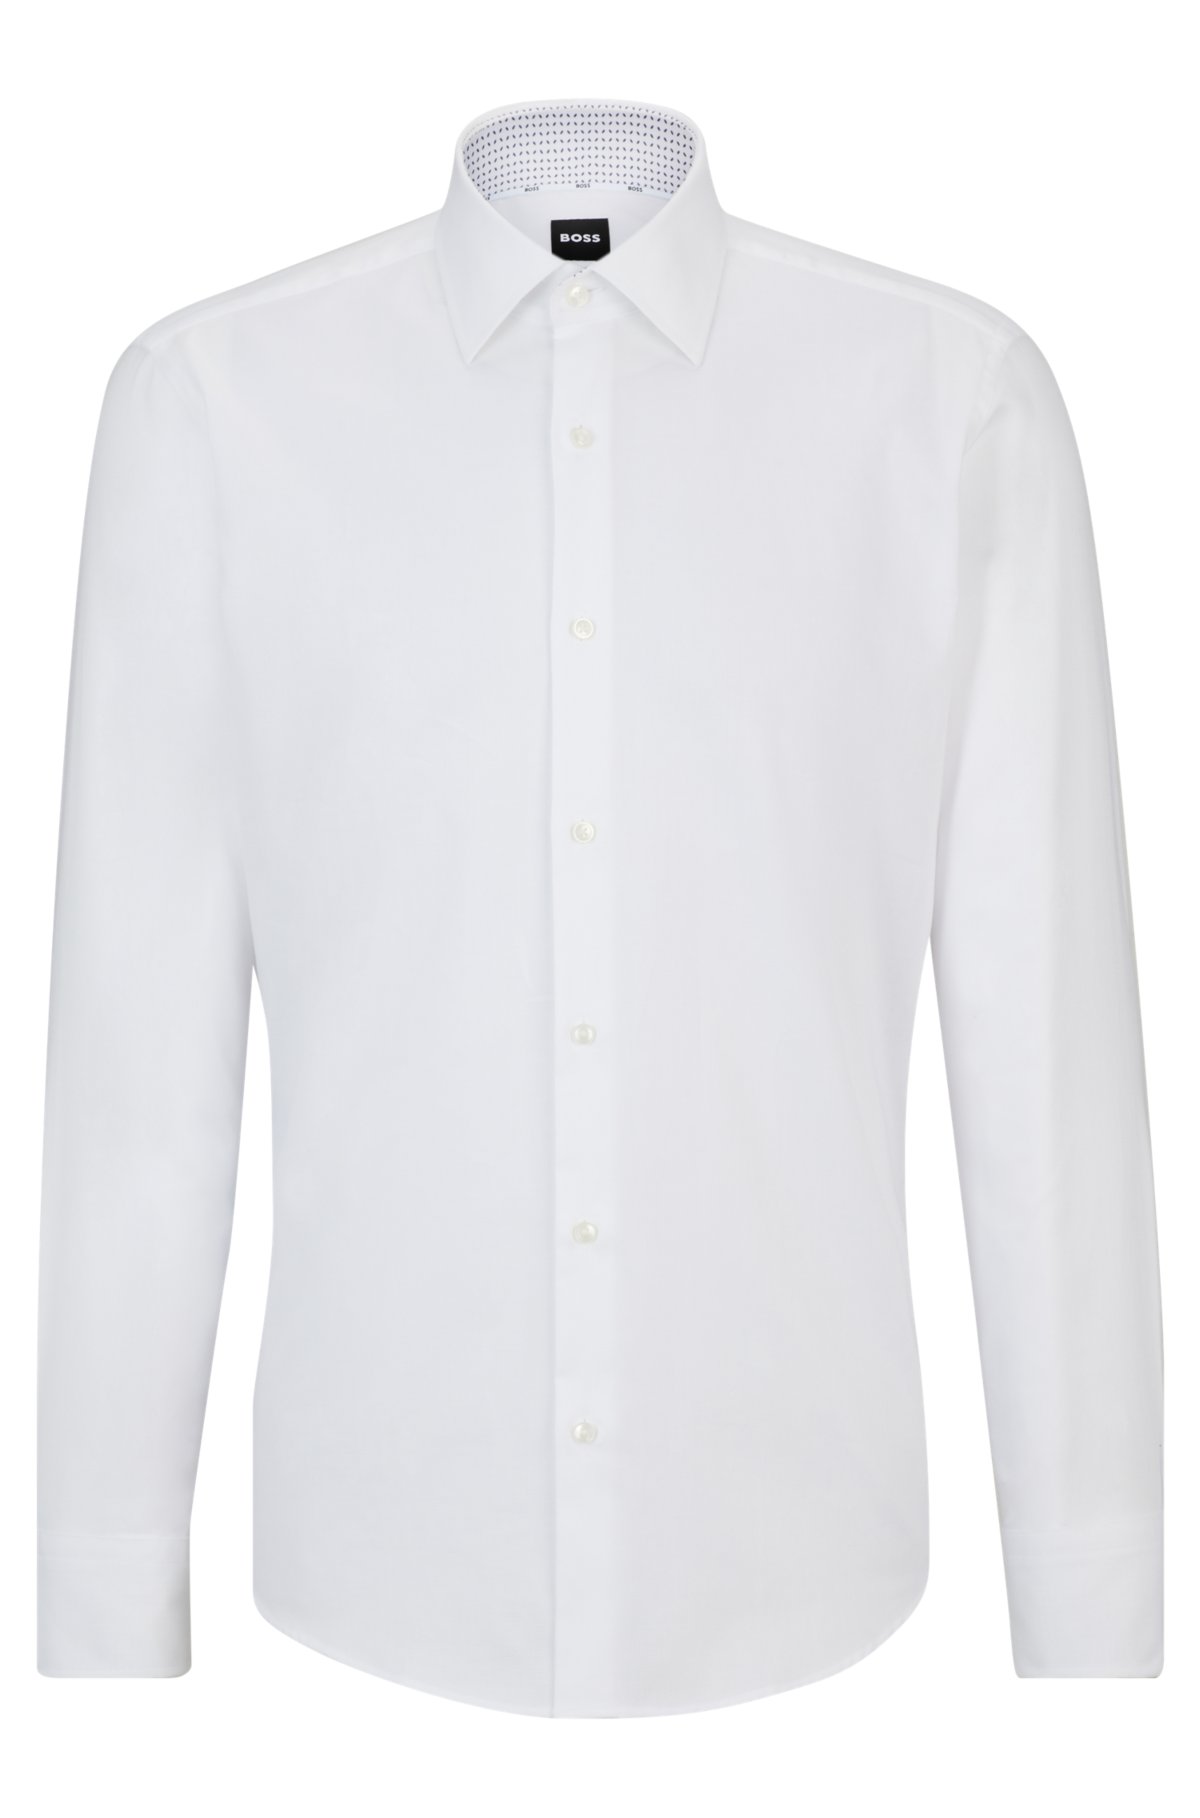 easy-iron cotton stretch Regular-fit shirt - BOSS in Oxford